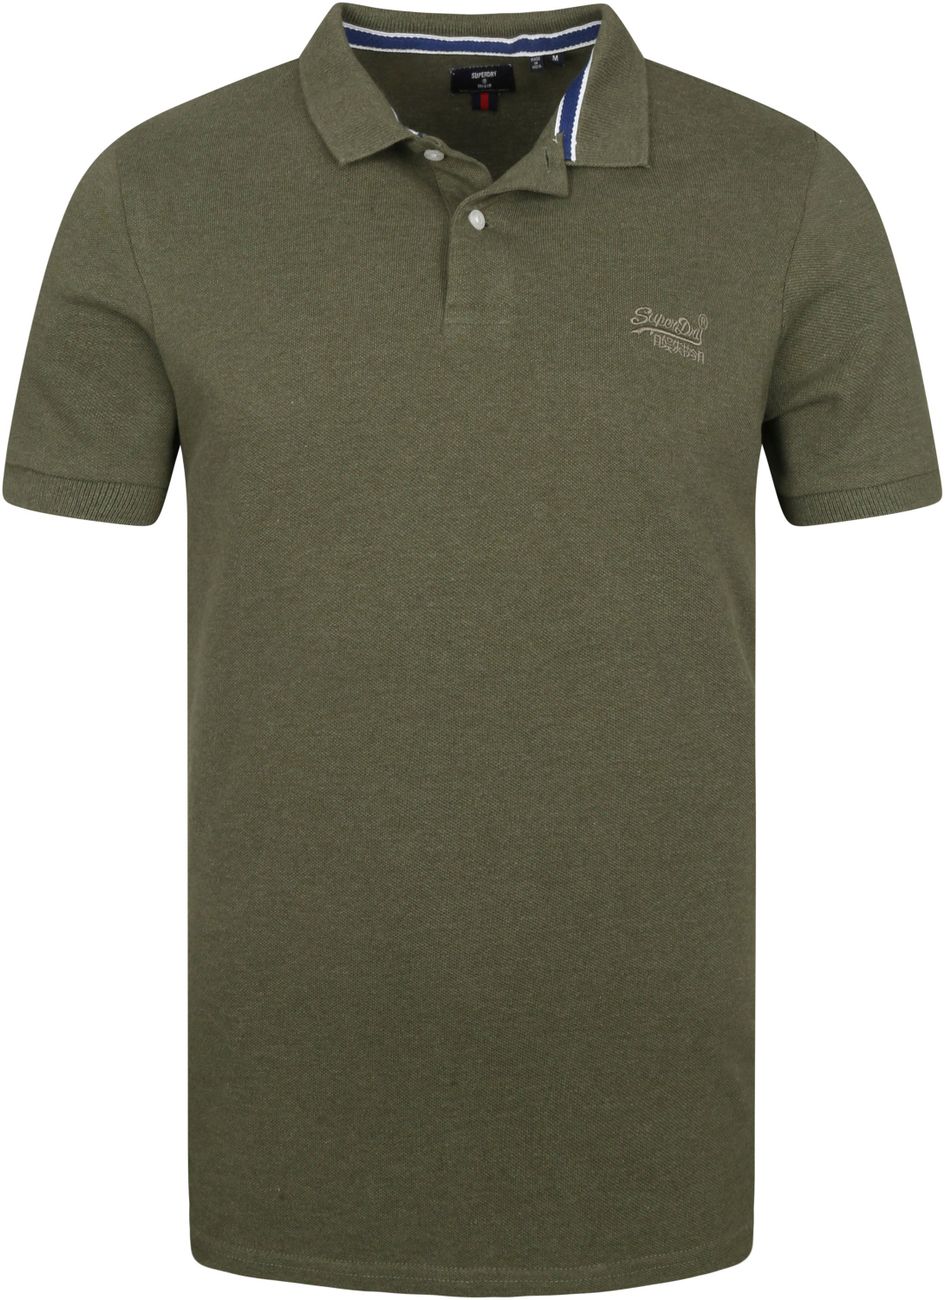 Menswear CLASSIC – SUPERDRY Noels GREEN PIQUE POLO